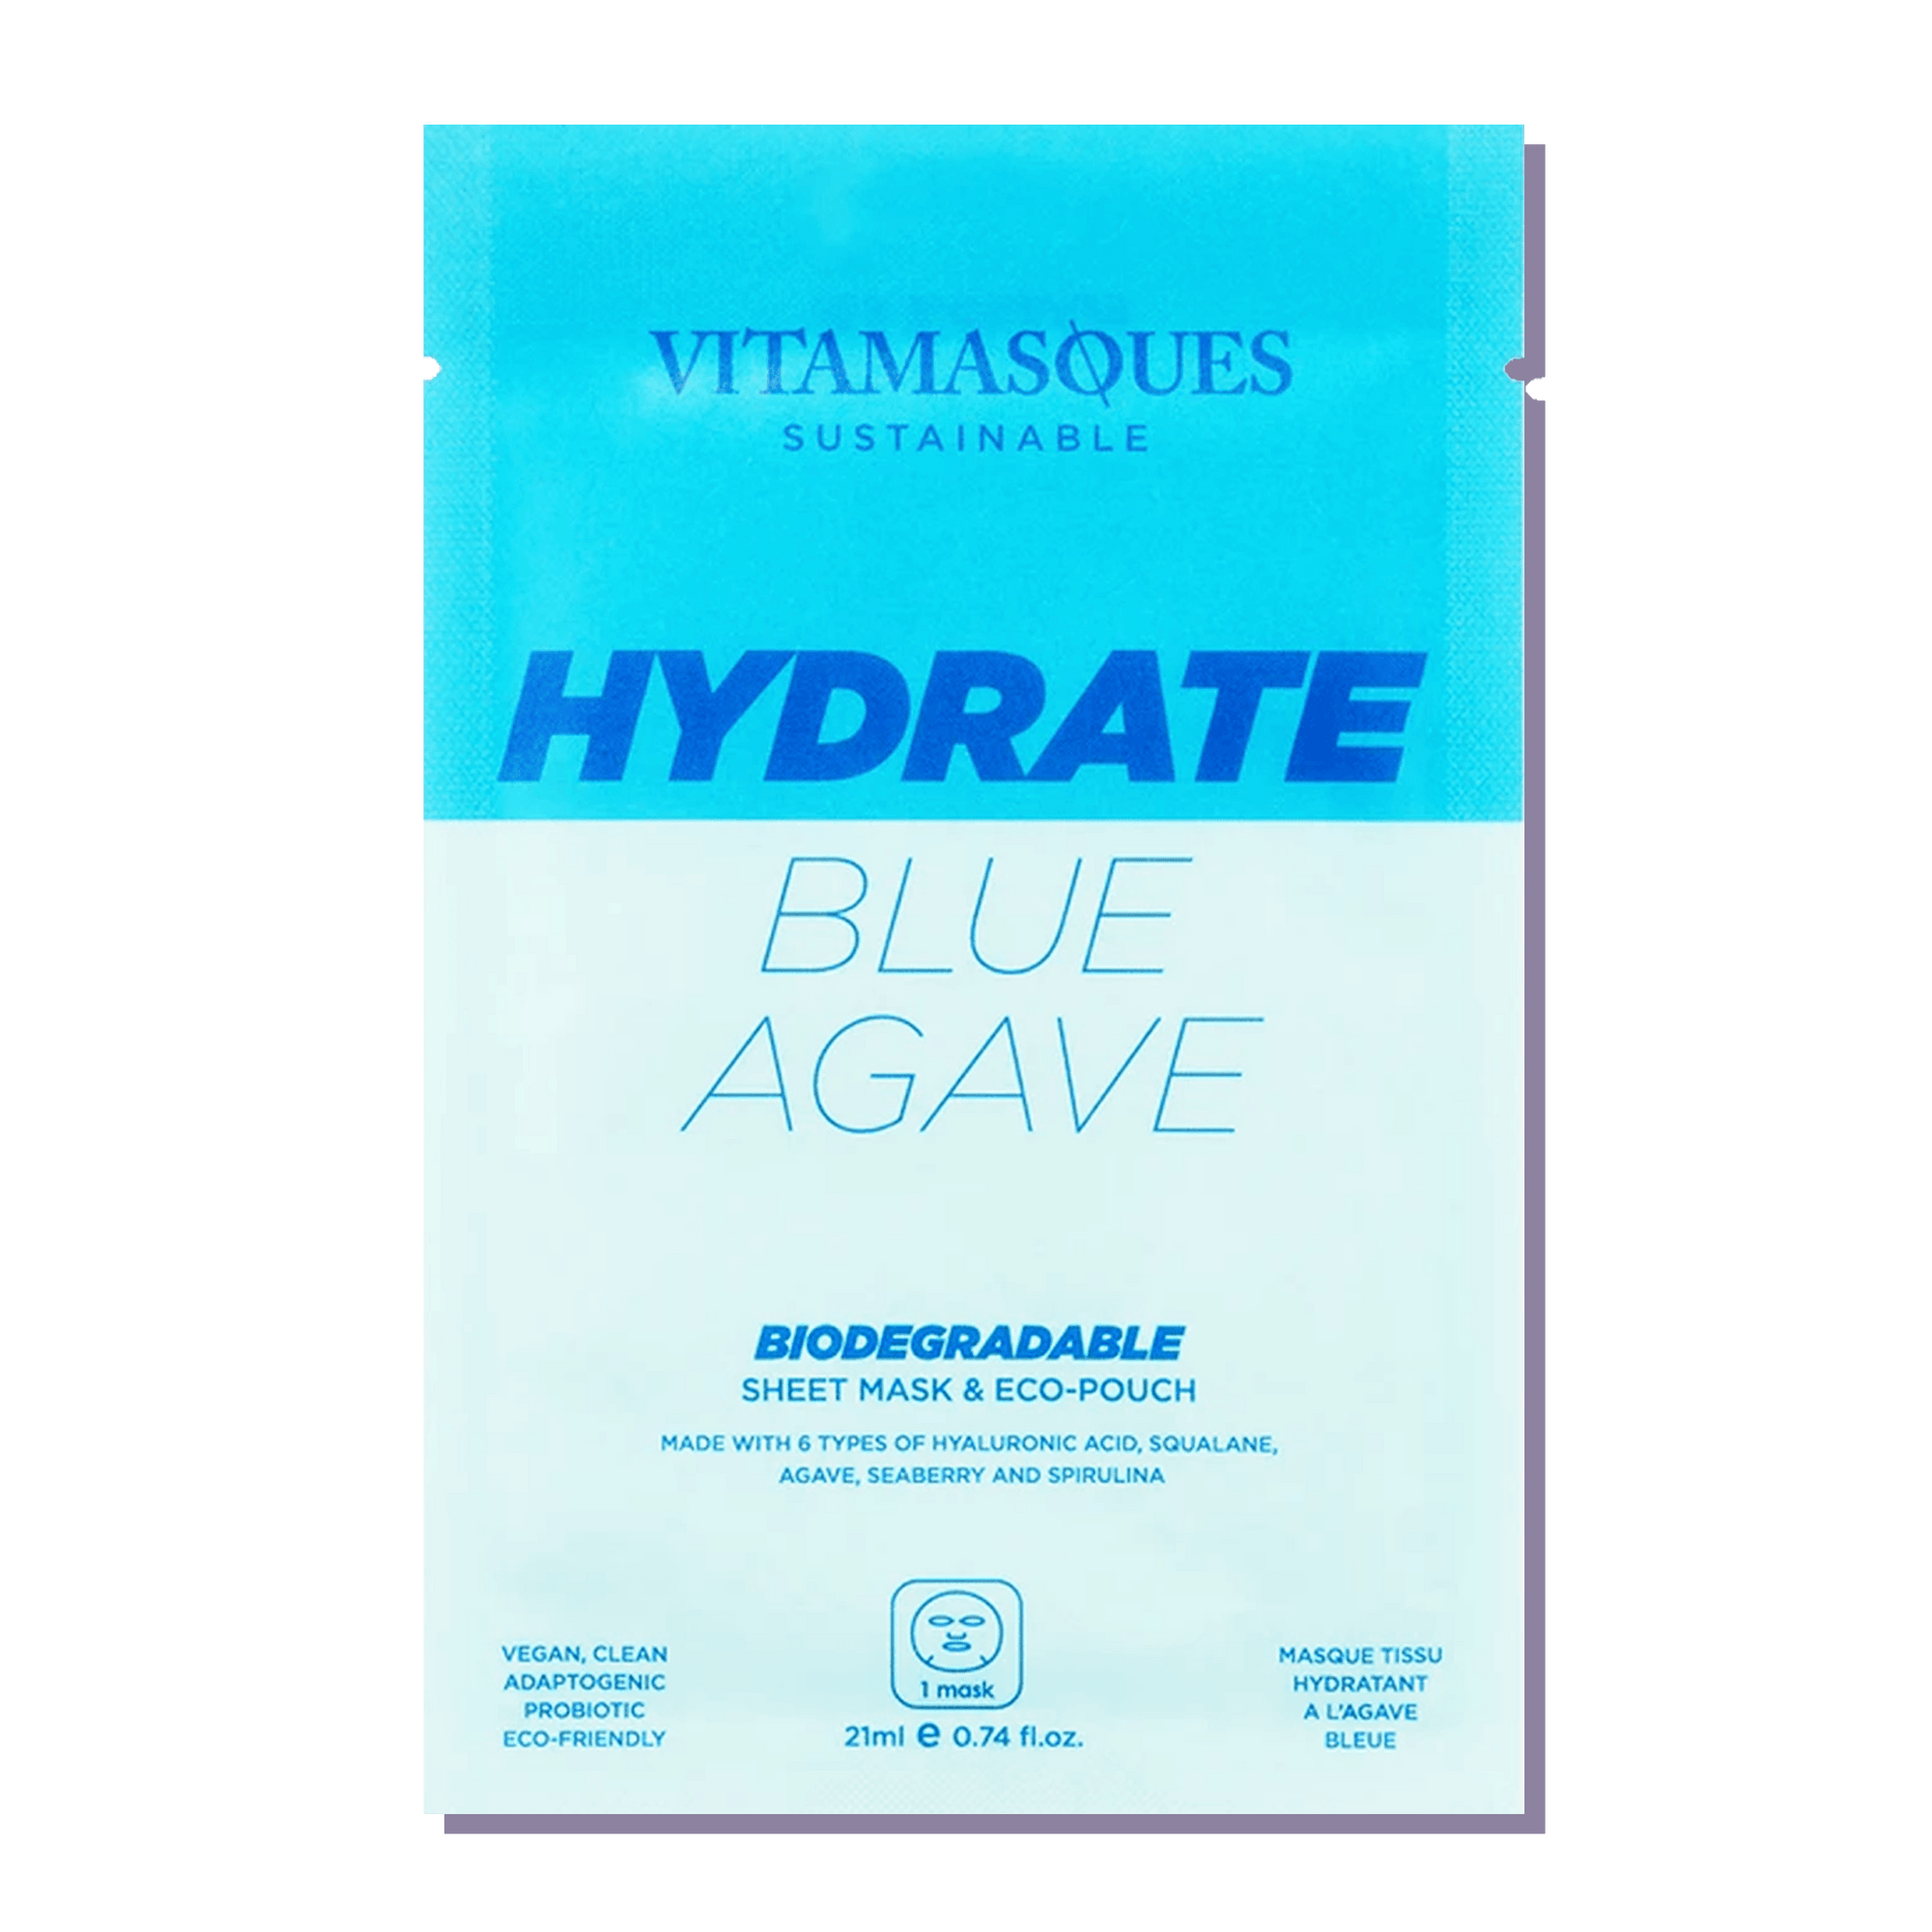 Hydrate Blue Agave Biodegradable Face Sheet Mask - Vitamasques